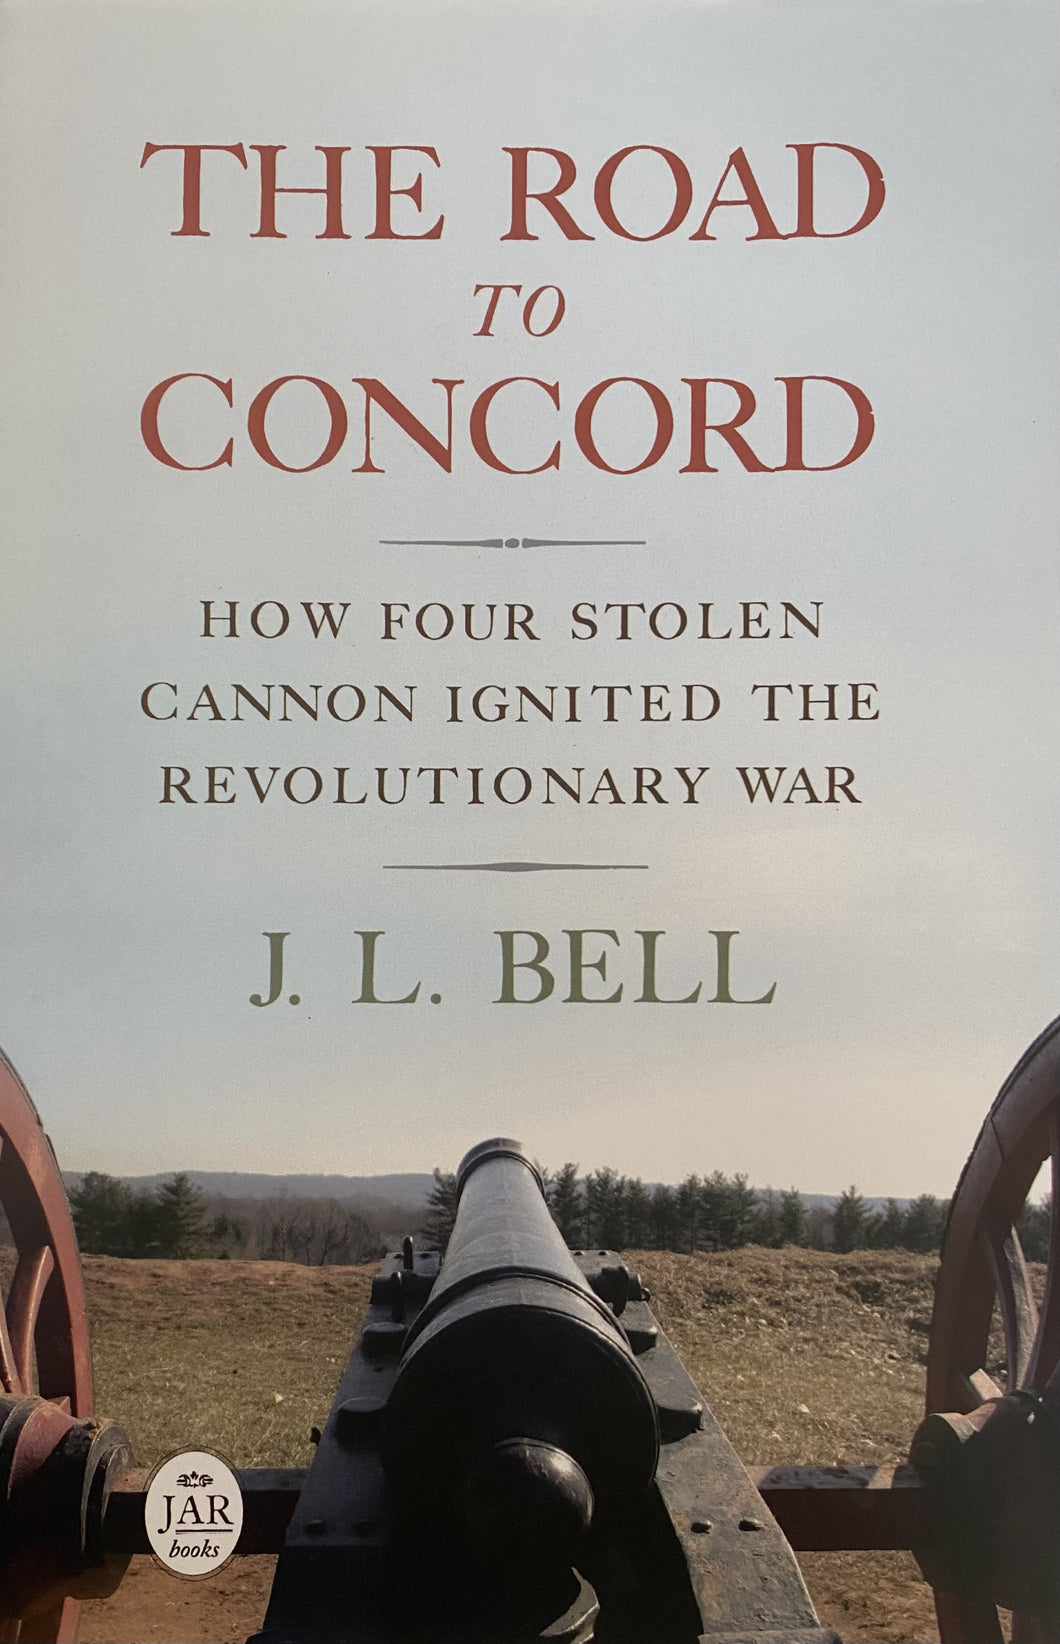 The Road to Concord: How Four Stolen Cannons Ignited the Revolutionary War